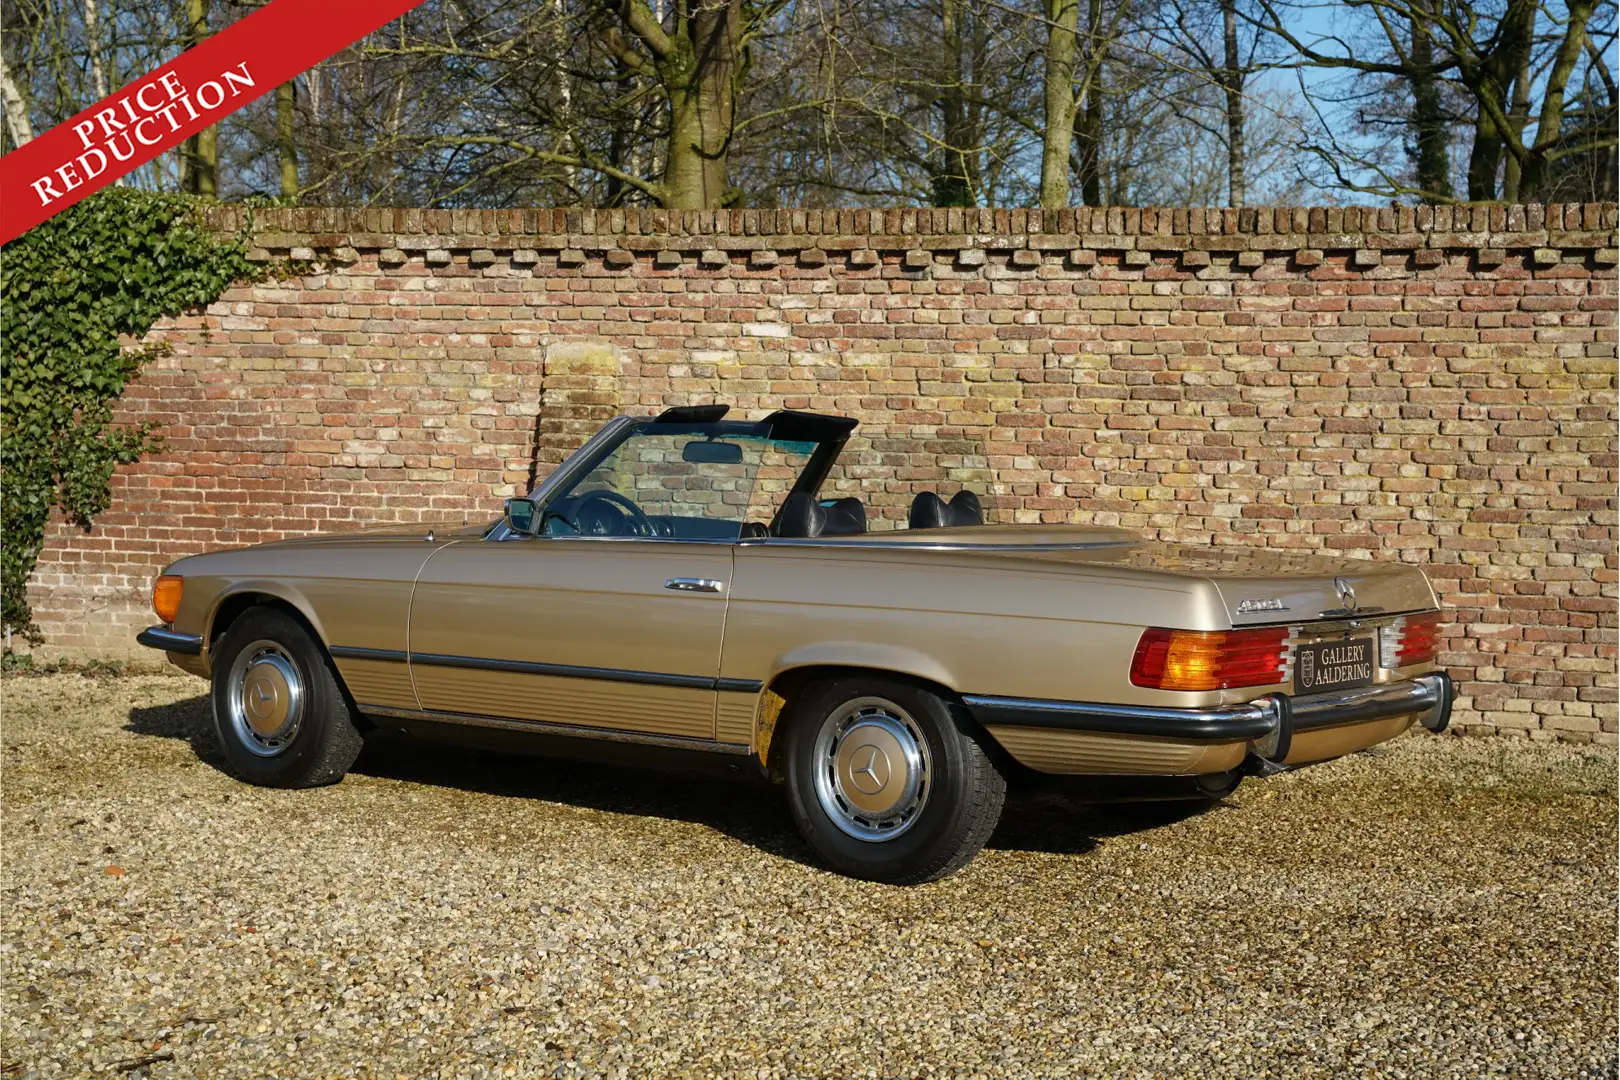 Mercedes-Benz SL 450 PRICE REDUCTION! Livery in Icon Gold (419) over Bl Or - 2